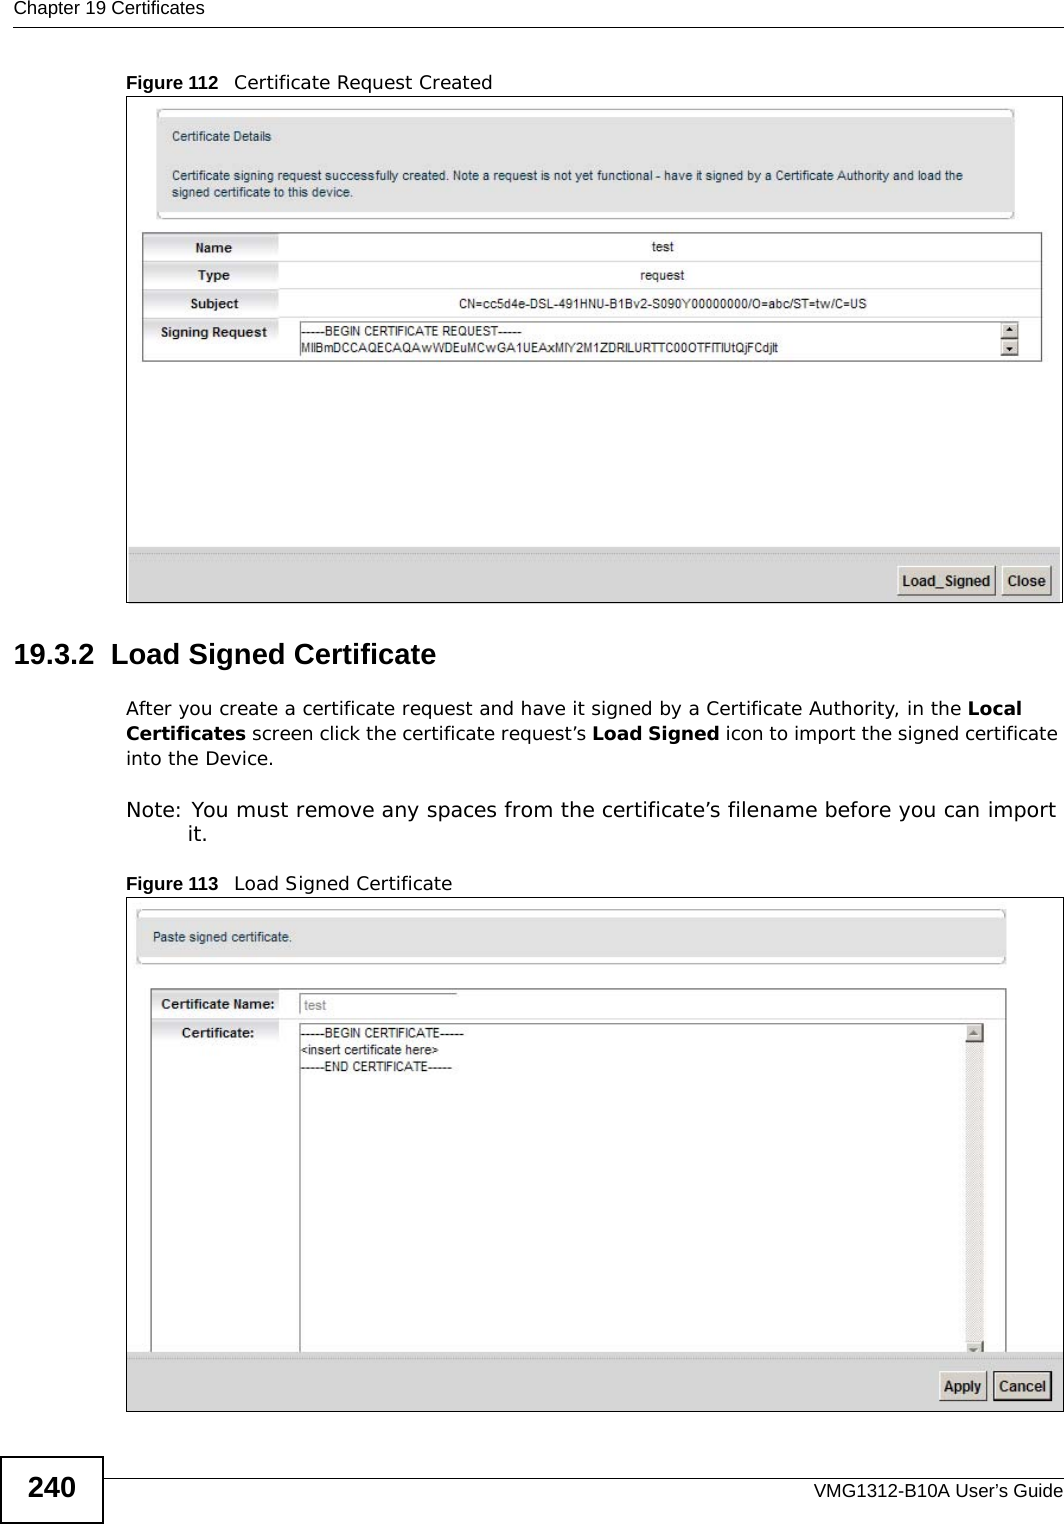 Chapter 19 CertificatesVMG1312-B10A User’s Guide240Figure 112   Certificate Request Created19.3.2  Load Signed Certificate After you create a certificate request and have it signed by a Certificate Authority, in the Local Certificates screen click the certificate request’s Load Signed icon to import the signed certificate into the Device. Note: You must remove any spaces from the certificate’s filename before you can import it.Figure 113   Load Signed Certificate 